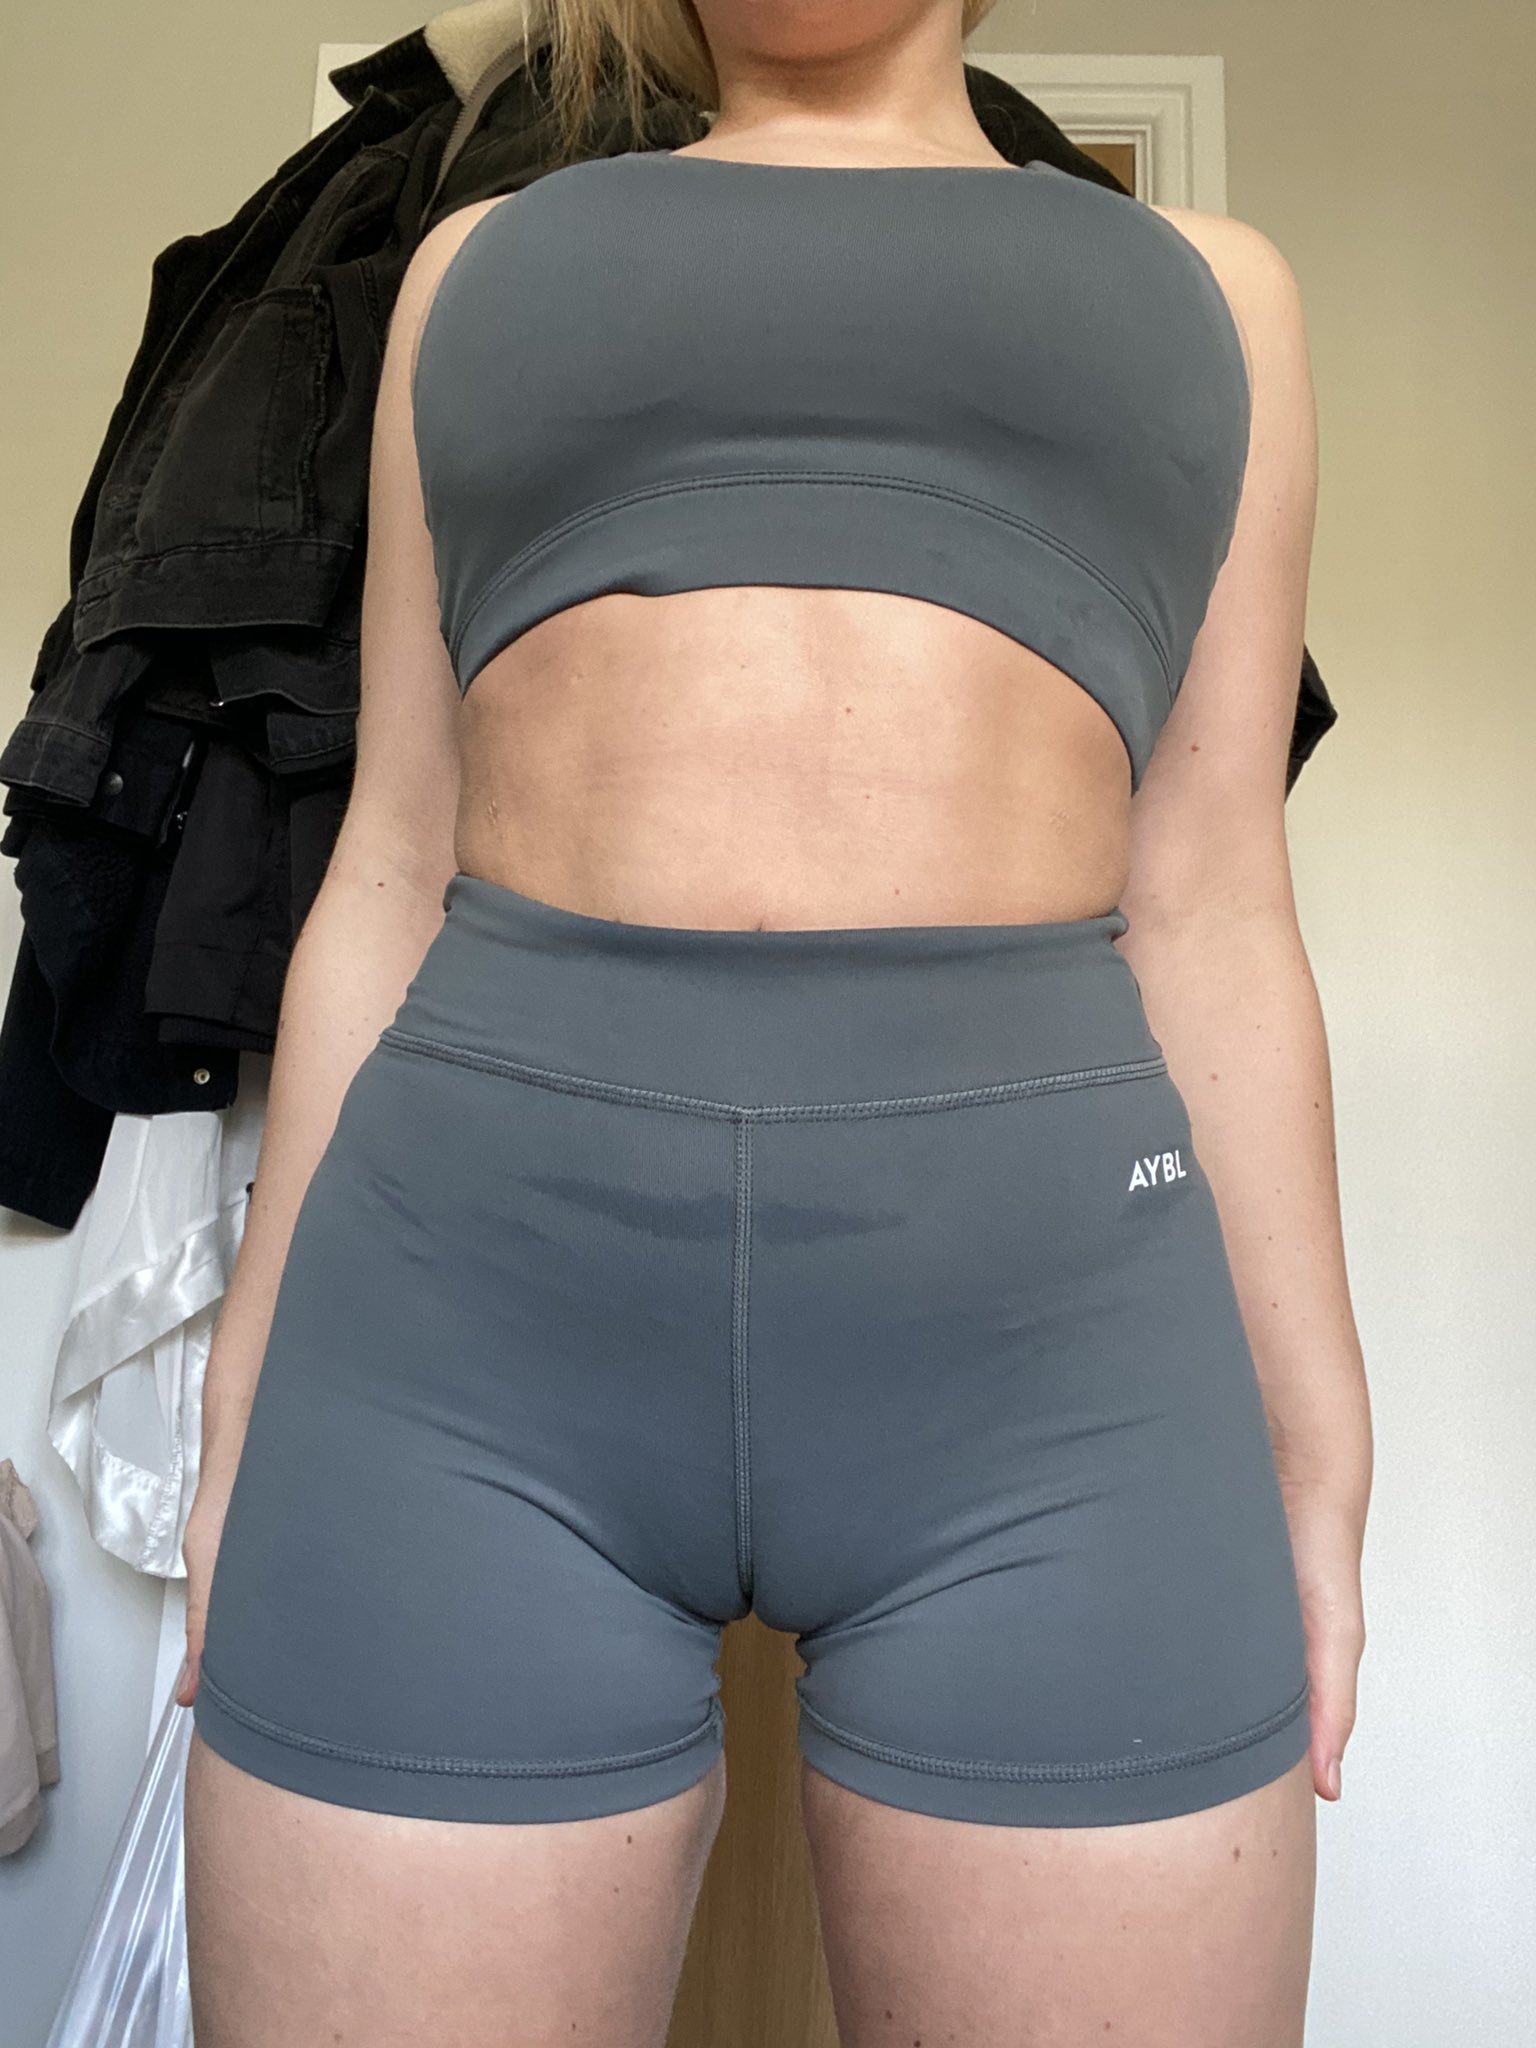 Elle Brooke on X: These gym shorts give me the worst camel toe